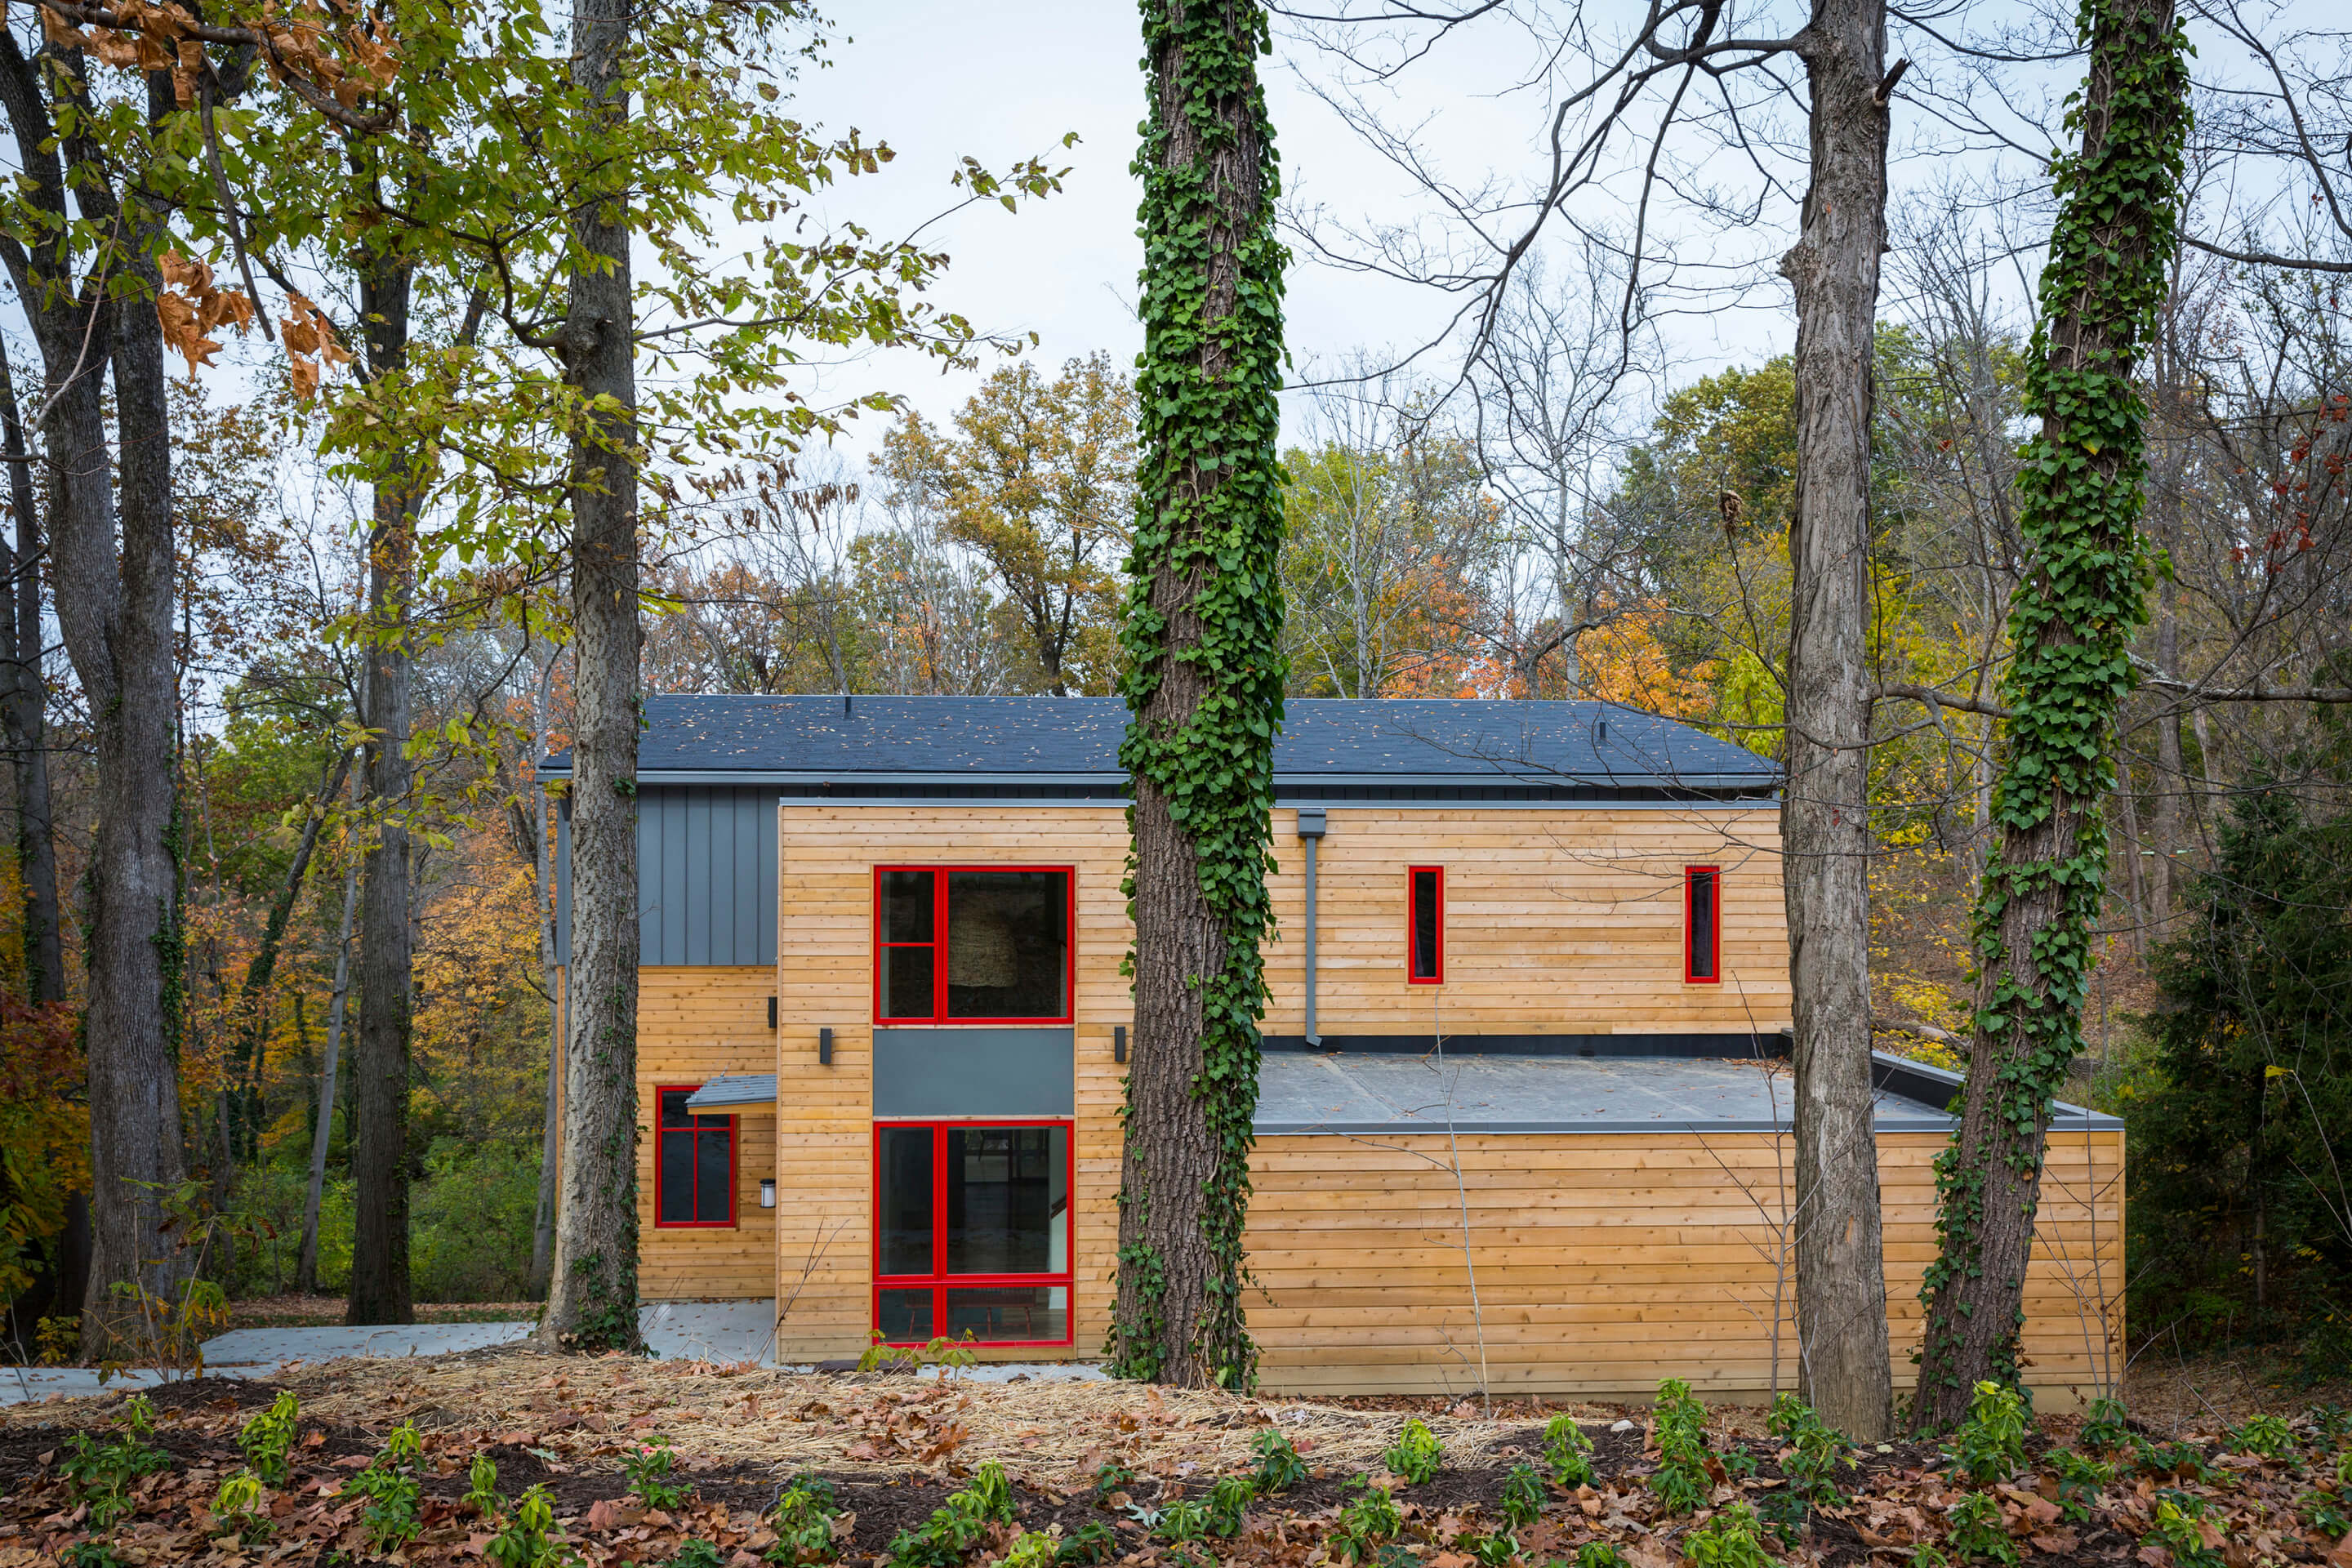 photograph depicting the exterior of a contemporary residence featuring prominent wood cladding